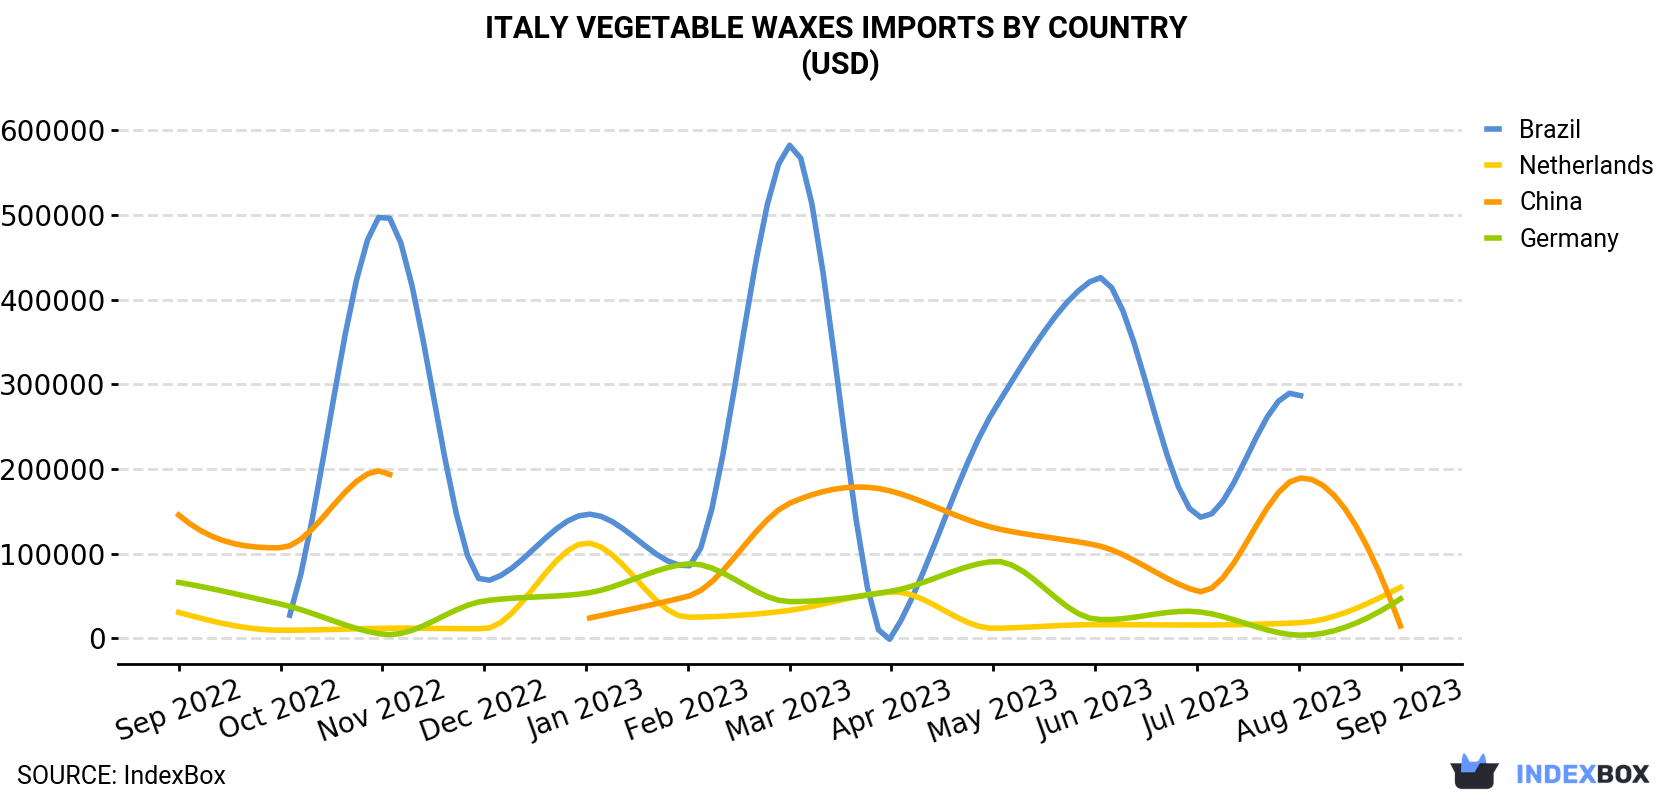 Italy Vegetable Waxes Imports By Country (USD)